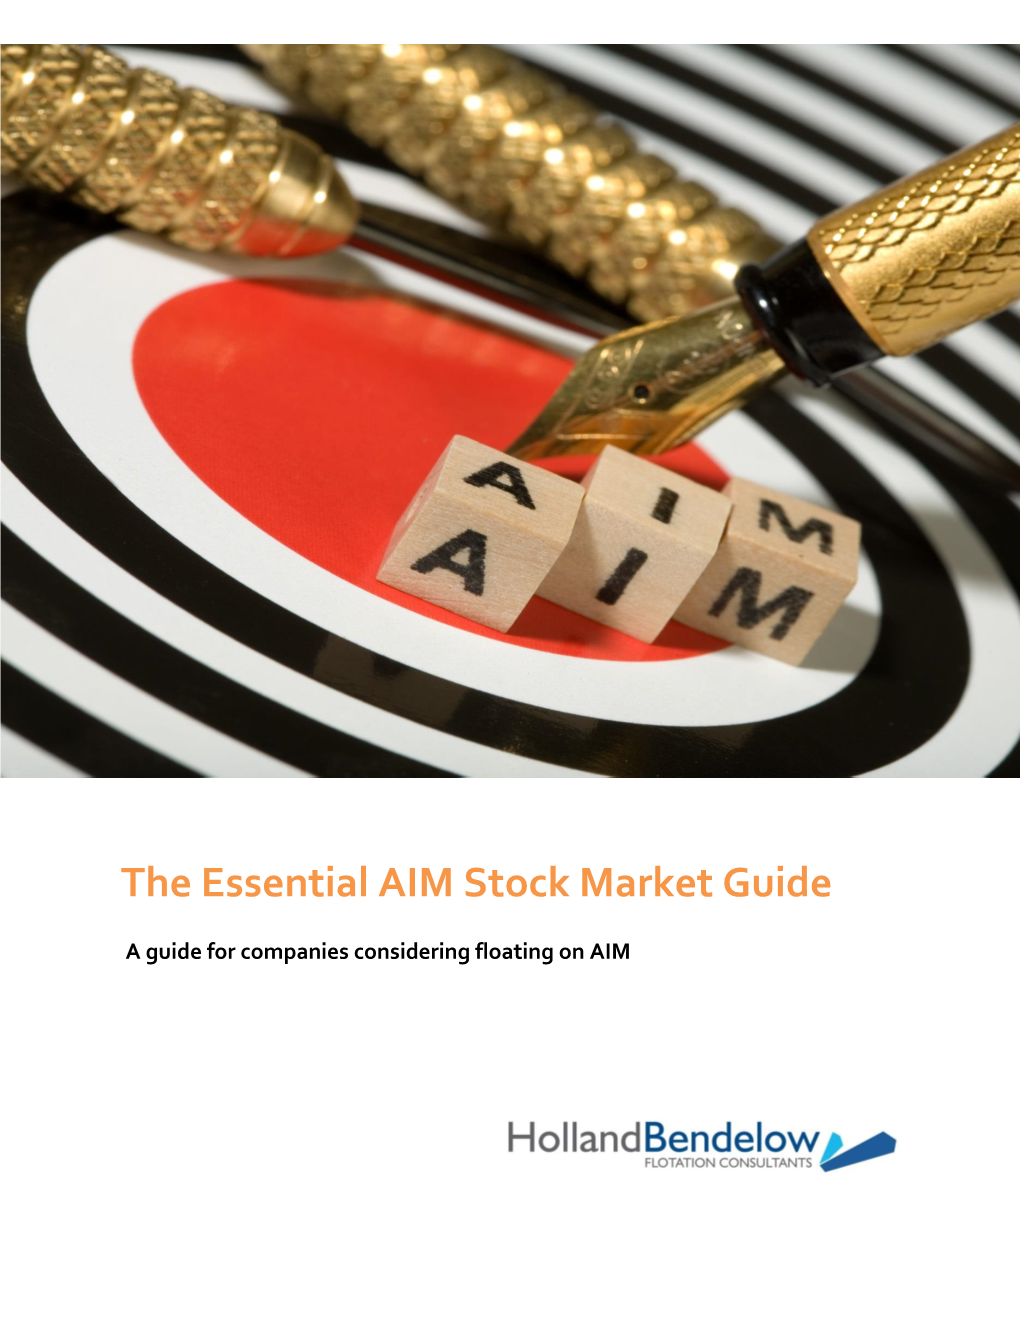 The Essential AIM Stock Market Guide